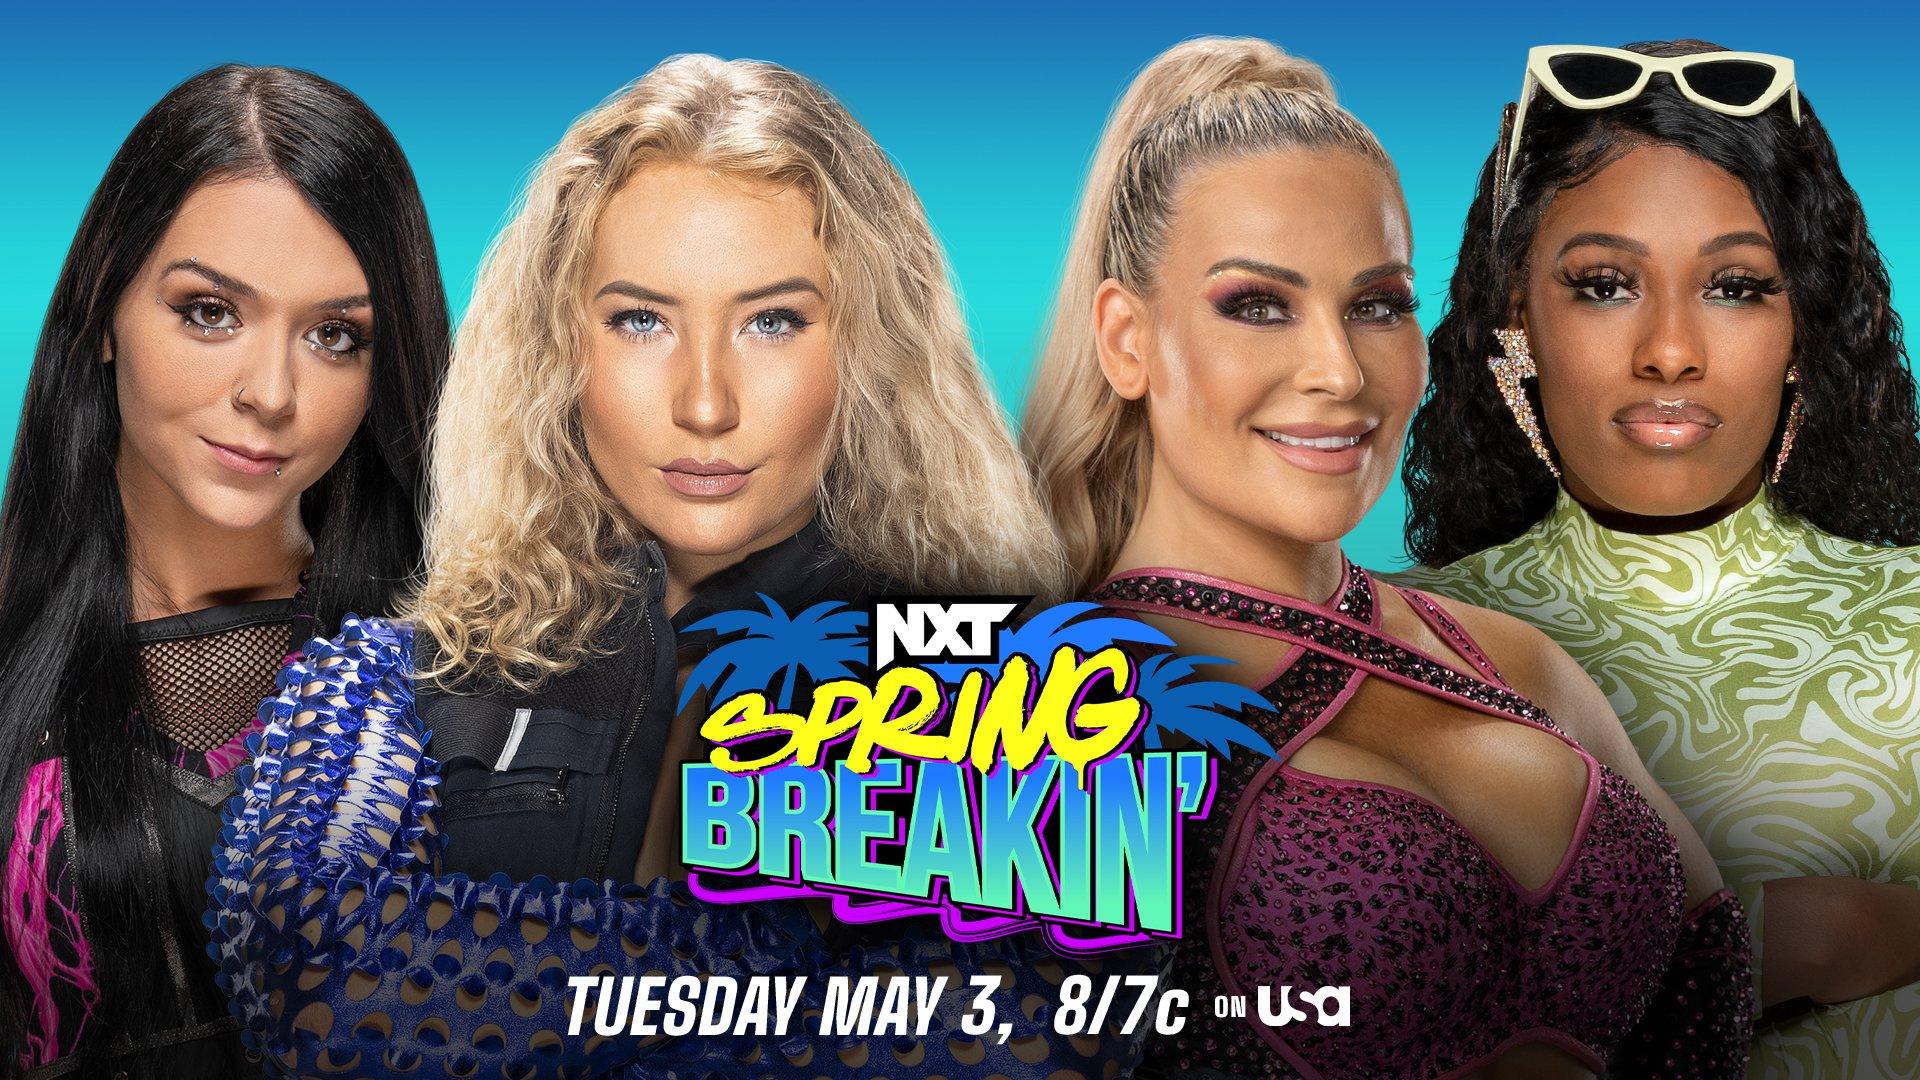 WWE NXT Spring Breakin' May 3rd 2022 Preview